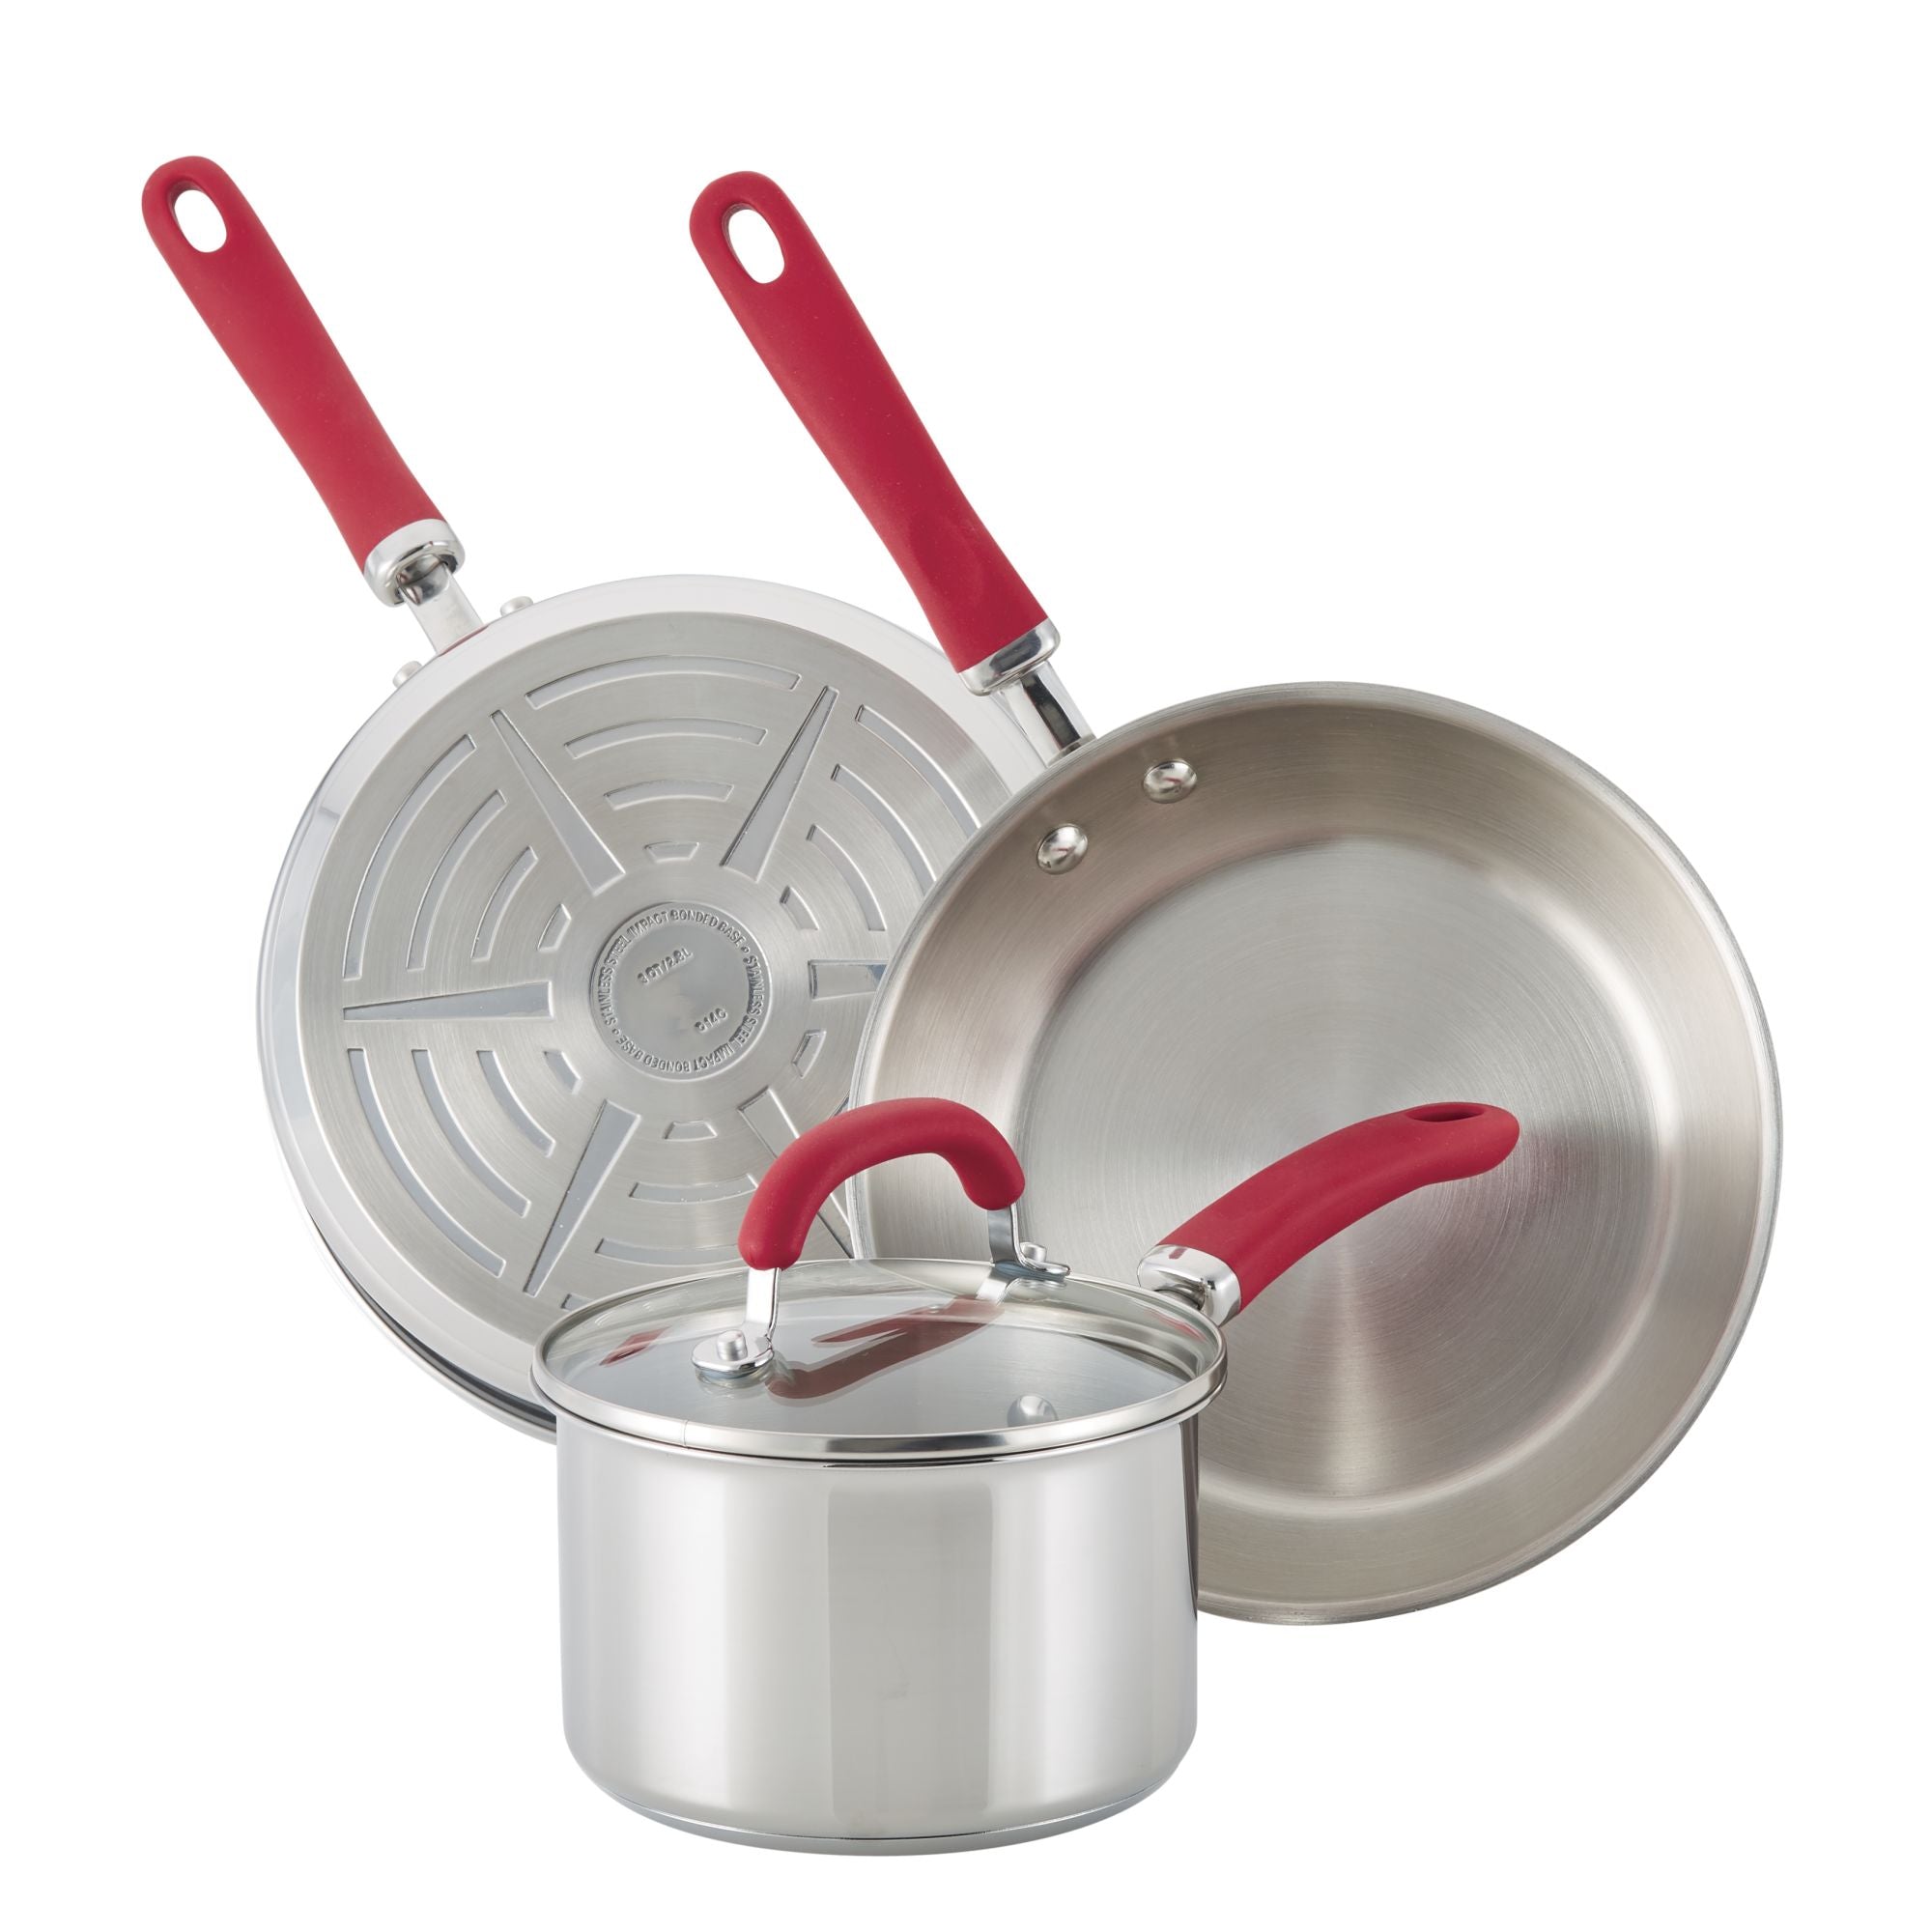 Create Delicious Stainless Steel 10-Piece Cookware Set